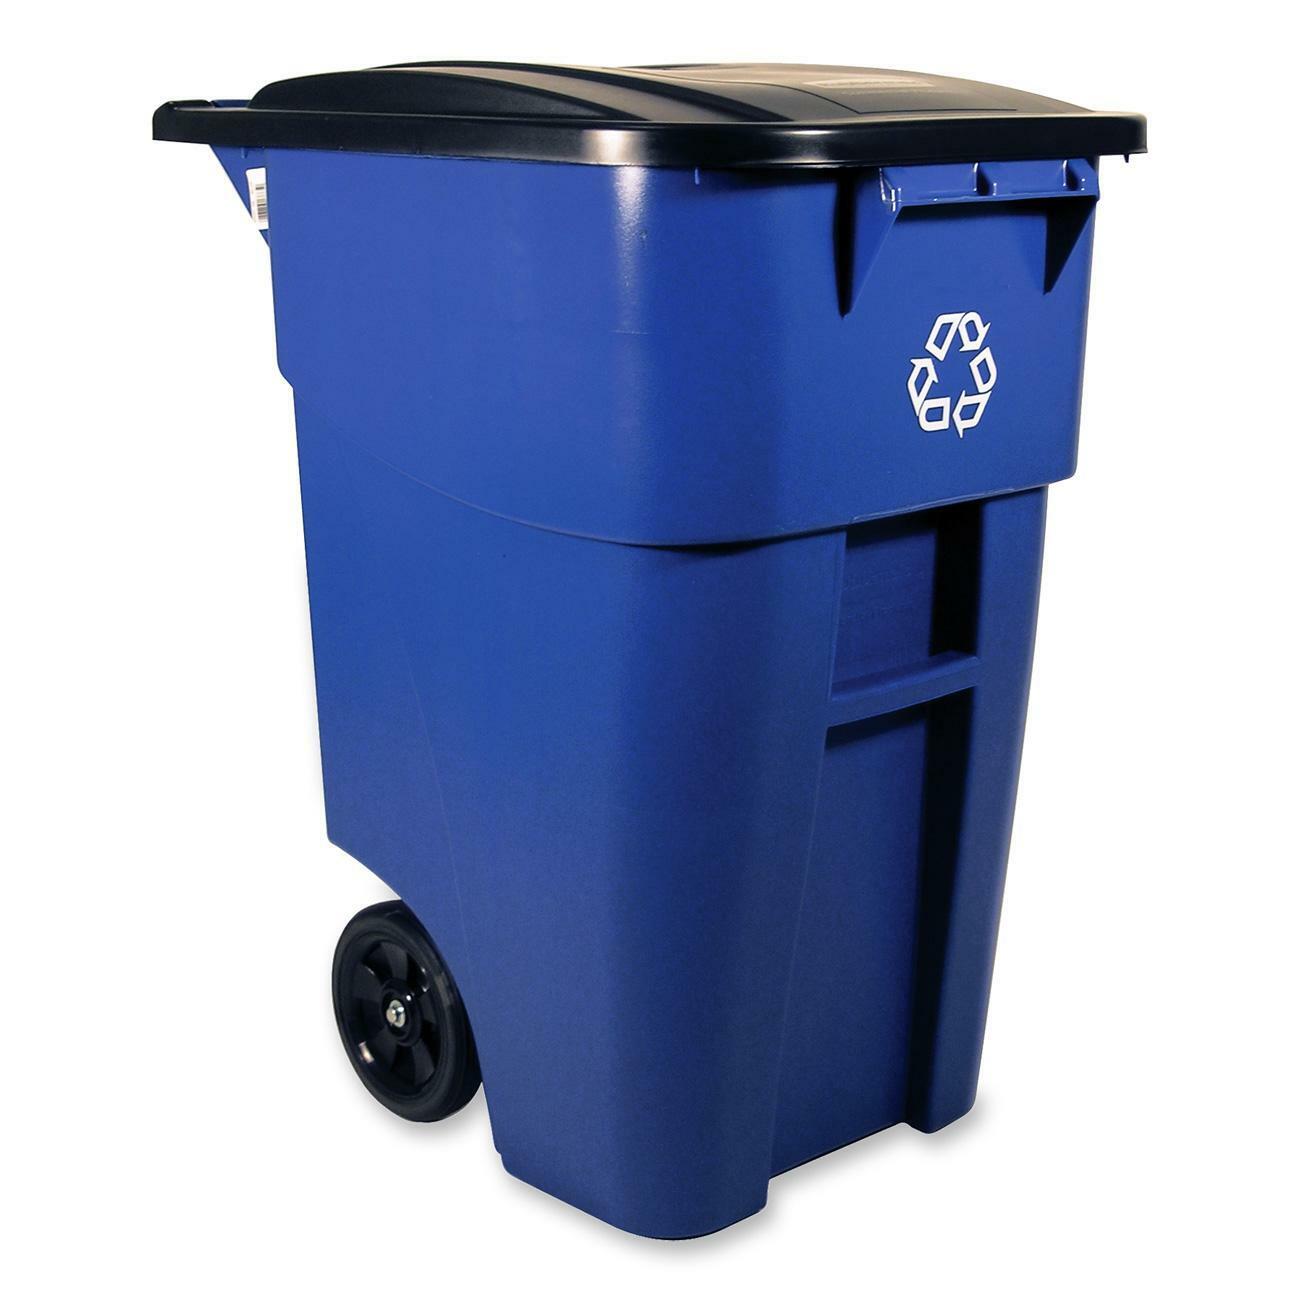 Rubbermaid Brute 50 Gallon Recycling Rollout Container with Lid, Blue - Each